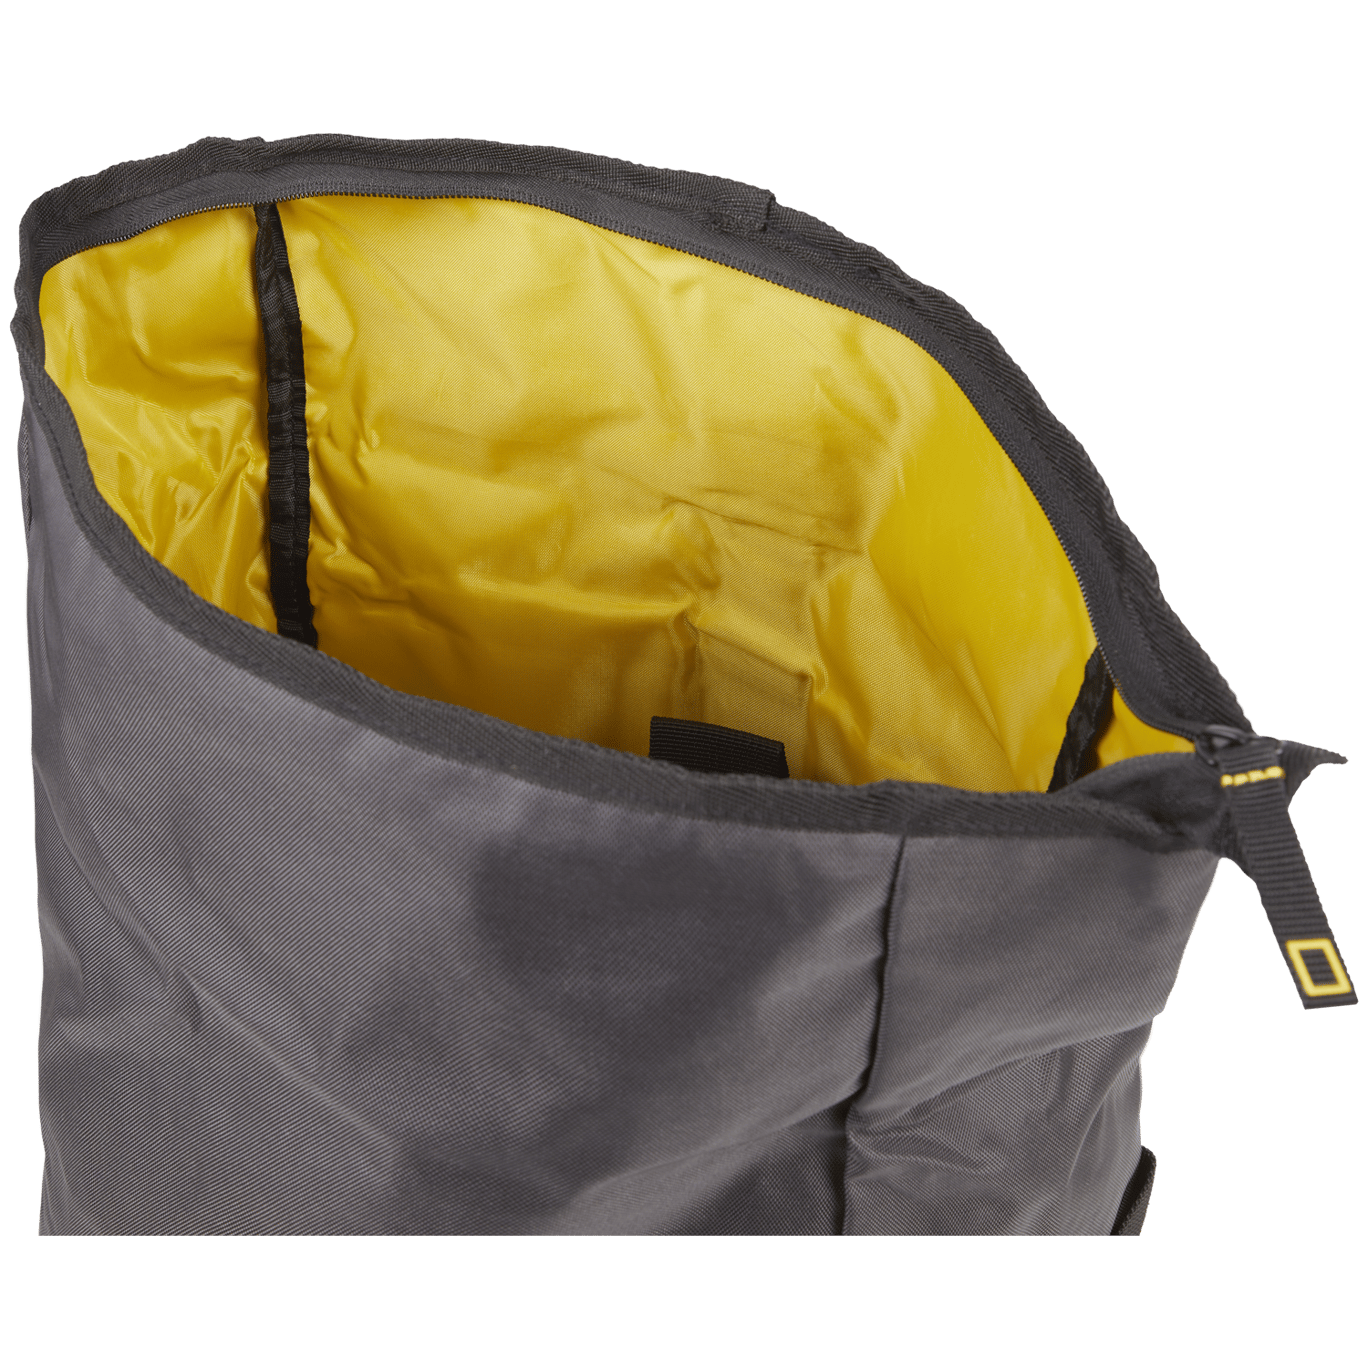 National Geographic roll-top rugzak